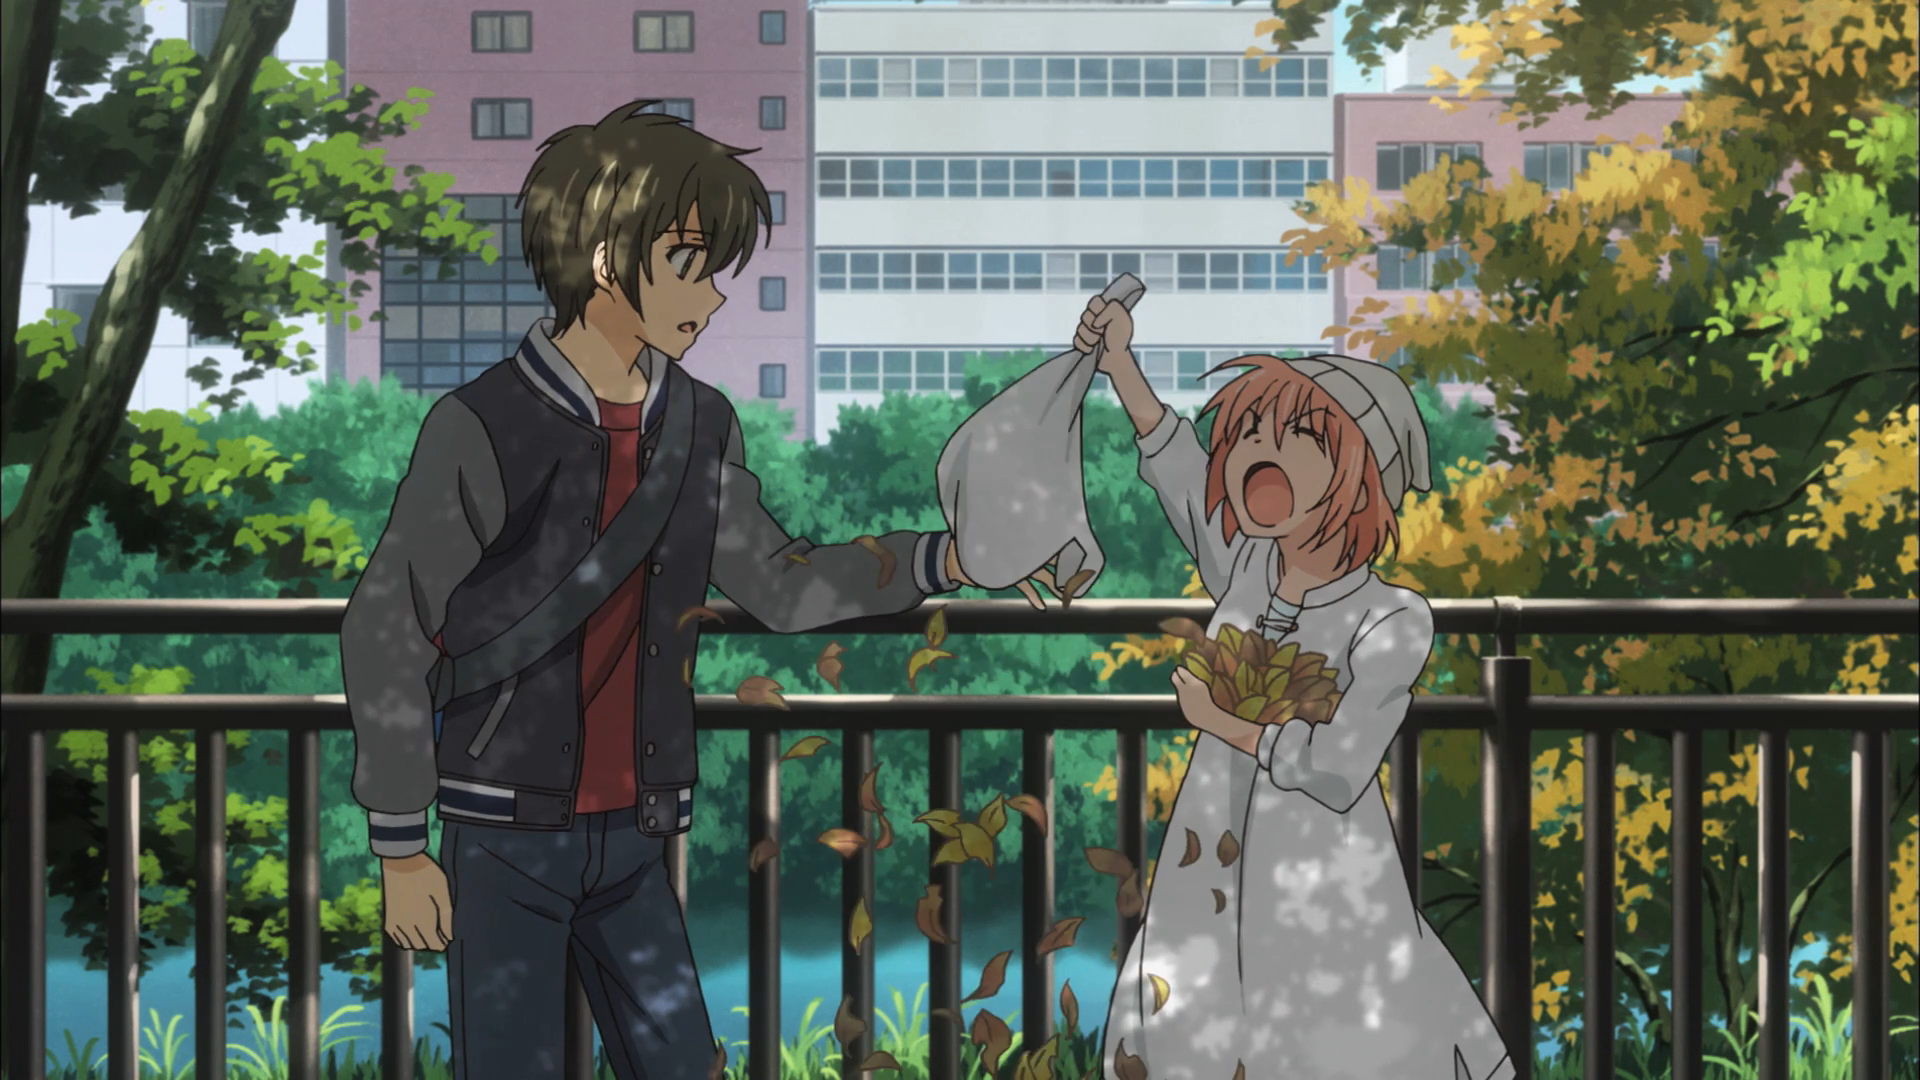 The BEST episodes of Golden Time